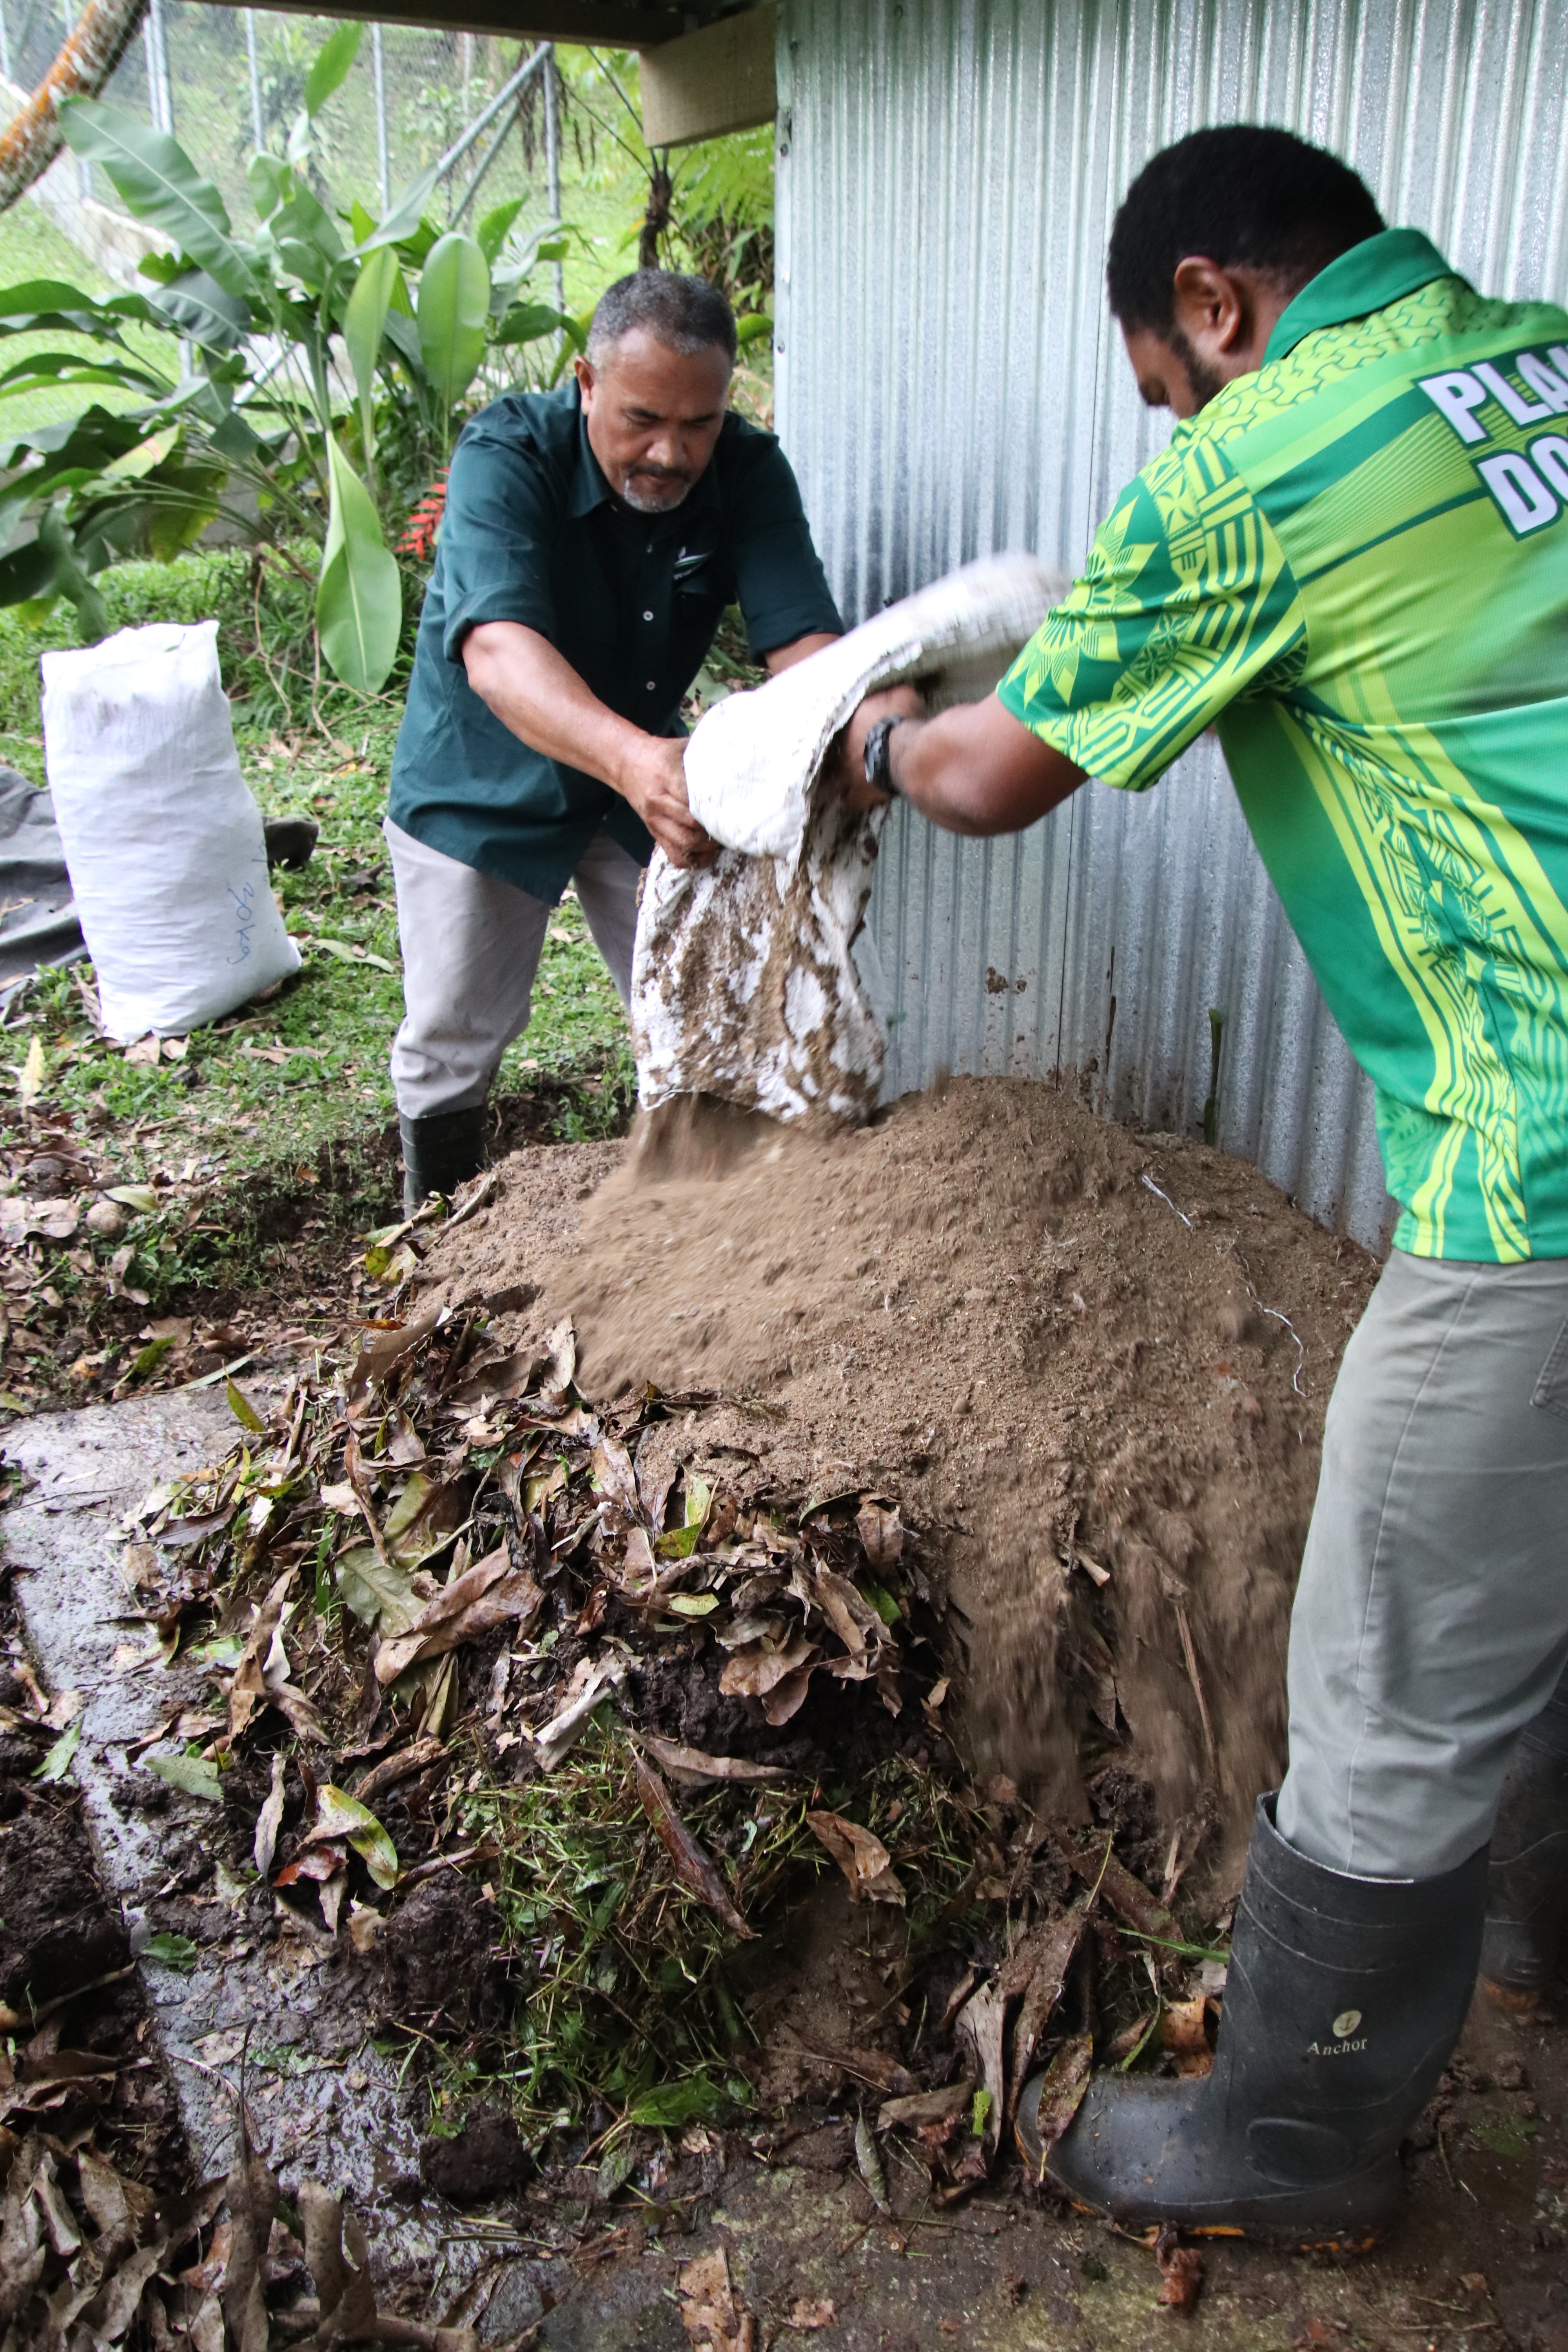 Two men adding soil from a bag to a garden bed